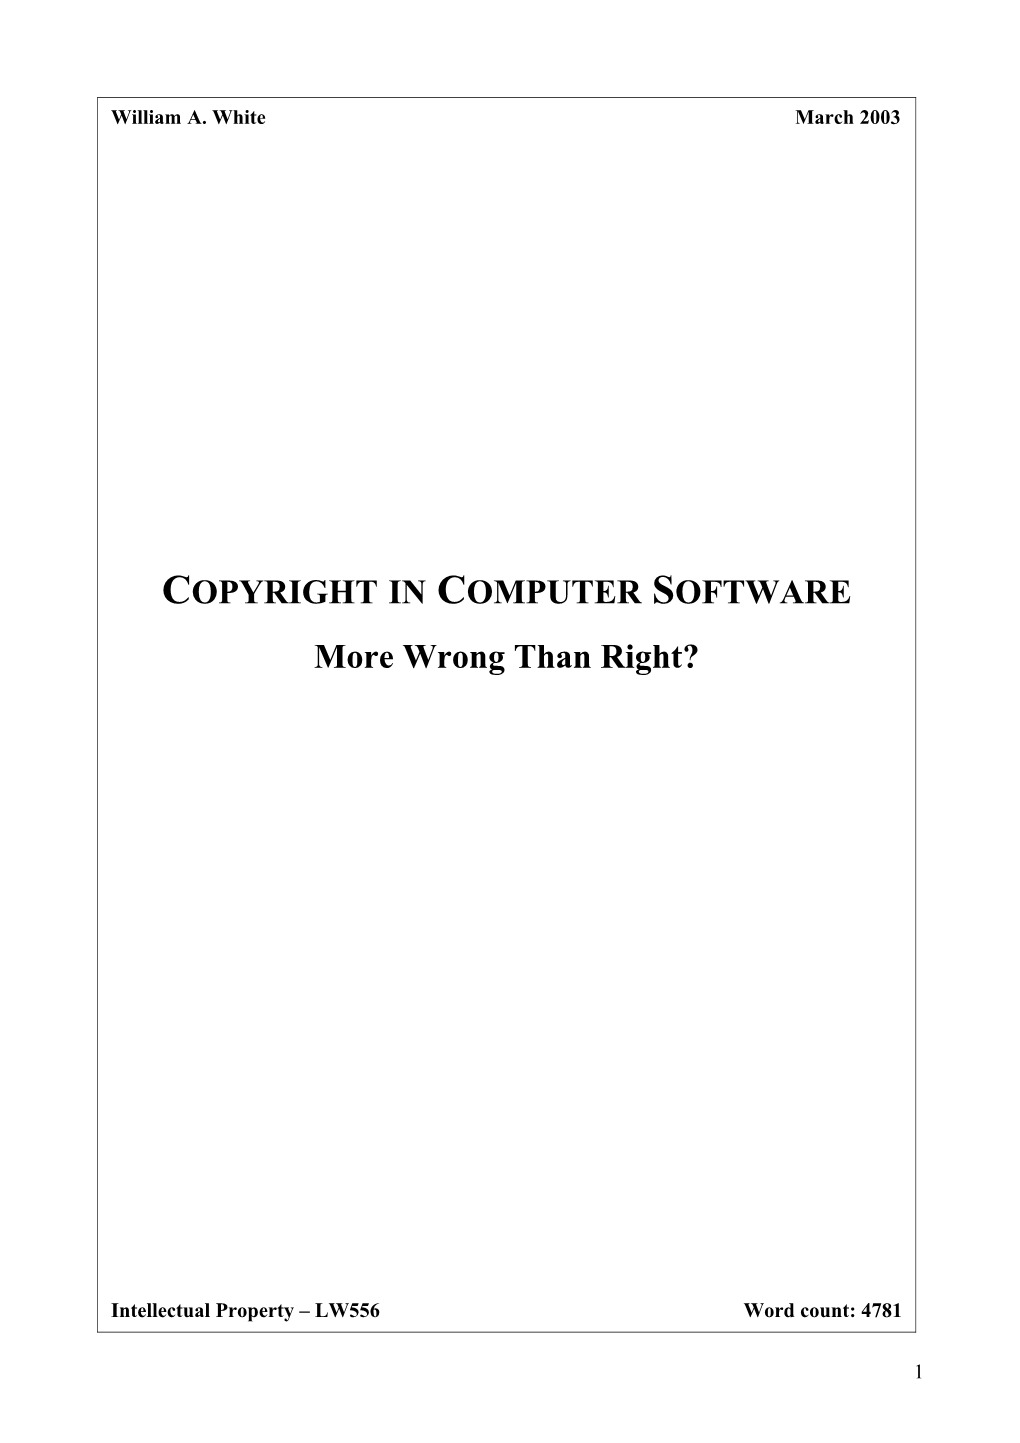 Copyright in Computer Software, Although Now Considered a Legal Certainty, Faces Gowing